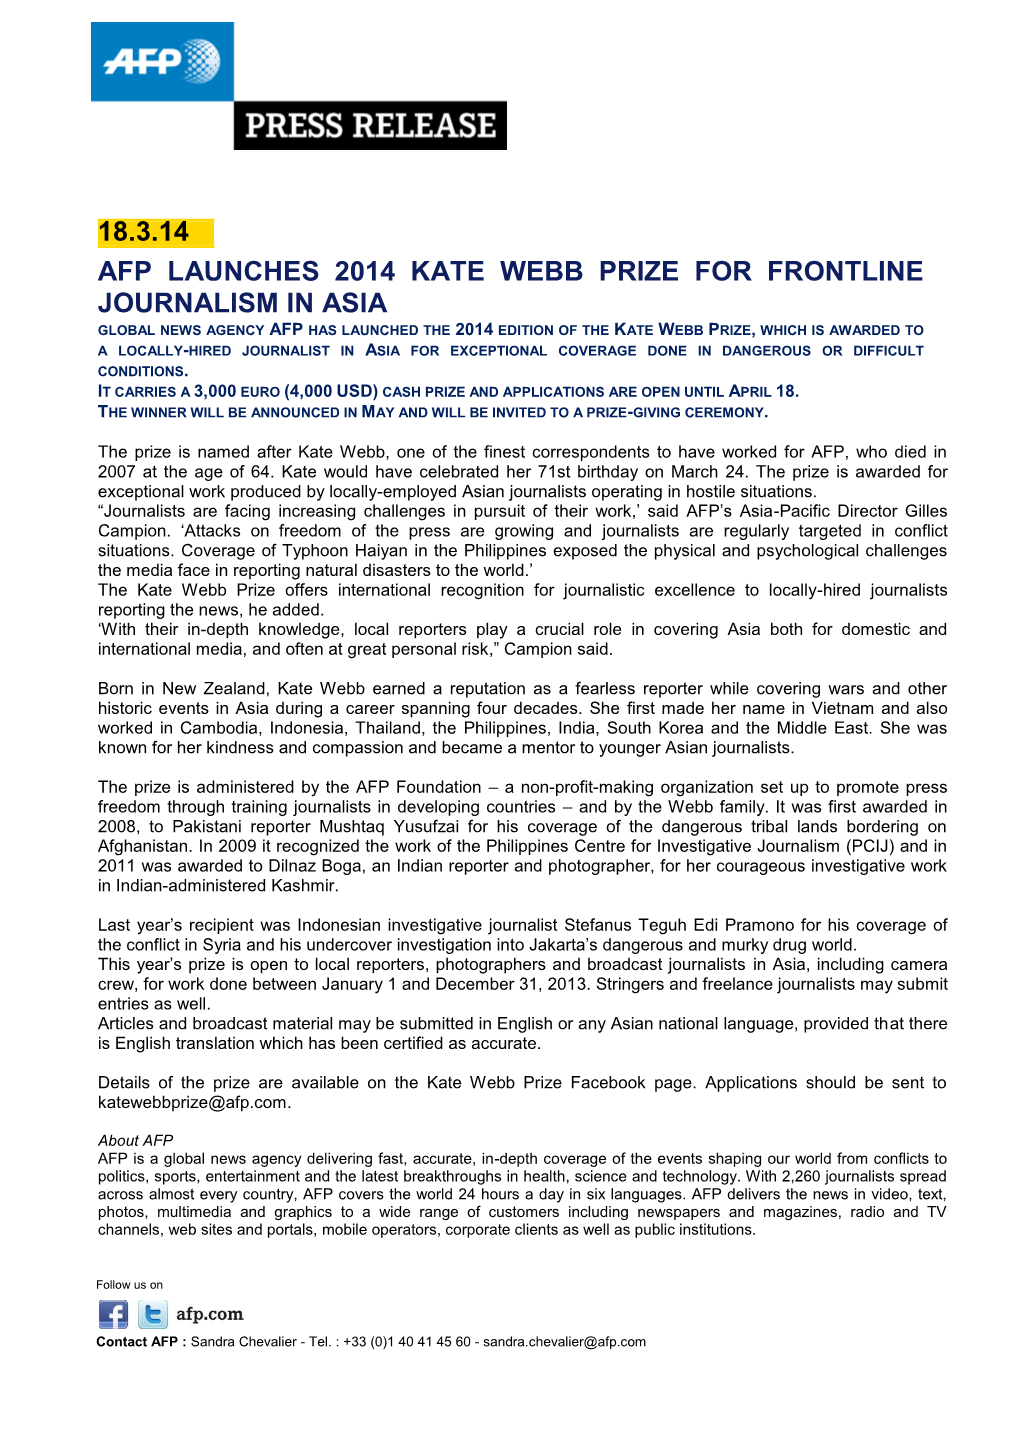 18.3.14 Afp Launches 2014 Kate Webb Prize for Frontline